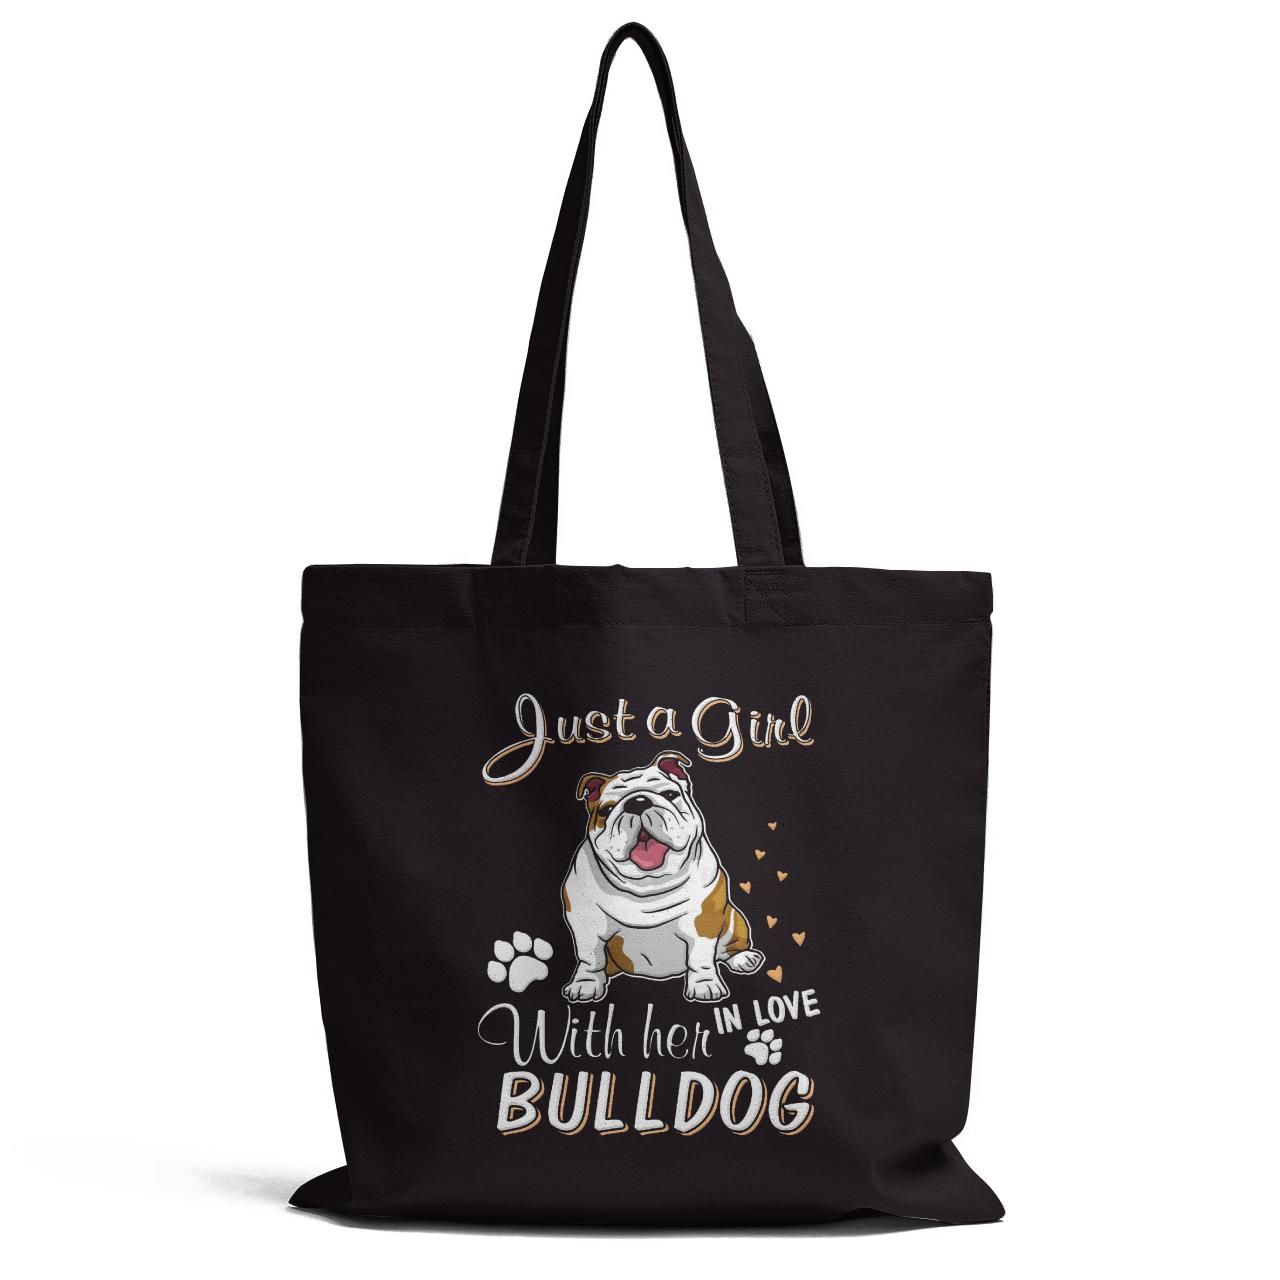 Just A Girl In Love With Her Bulldog Tote Bag